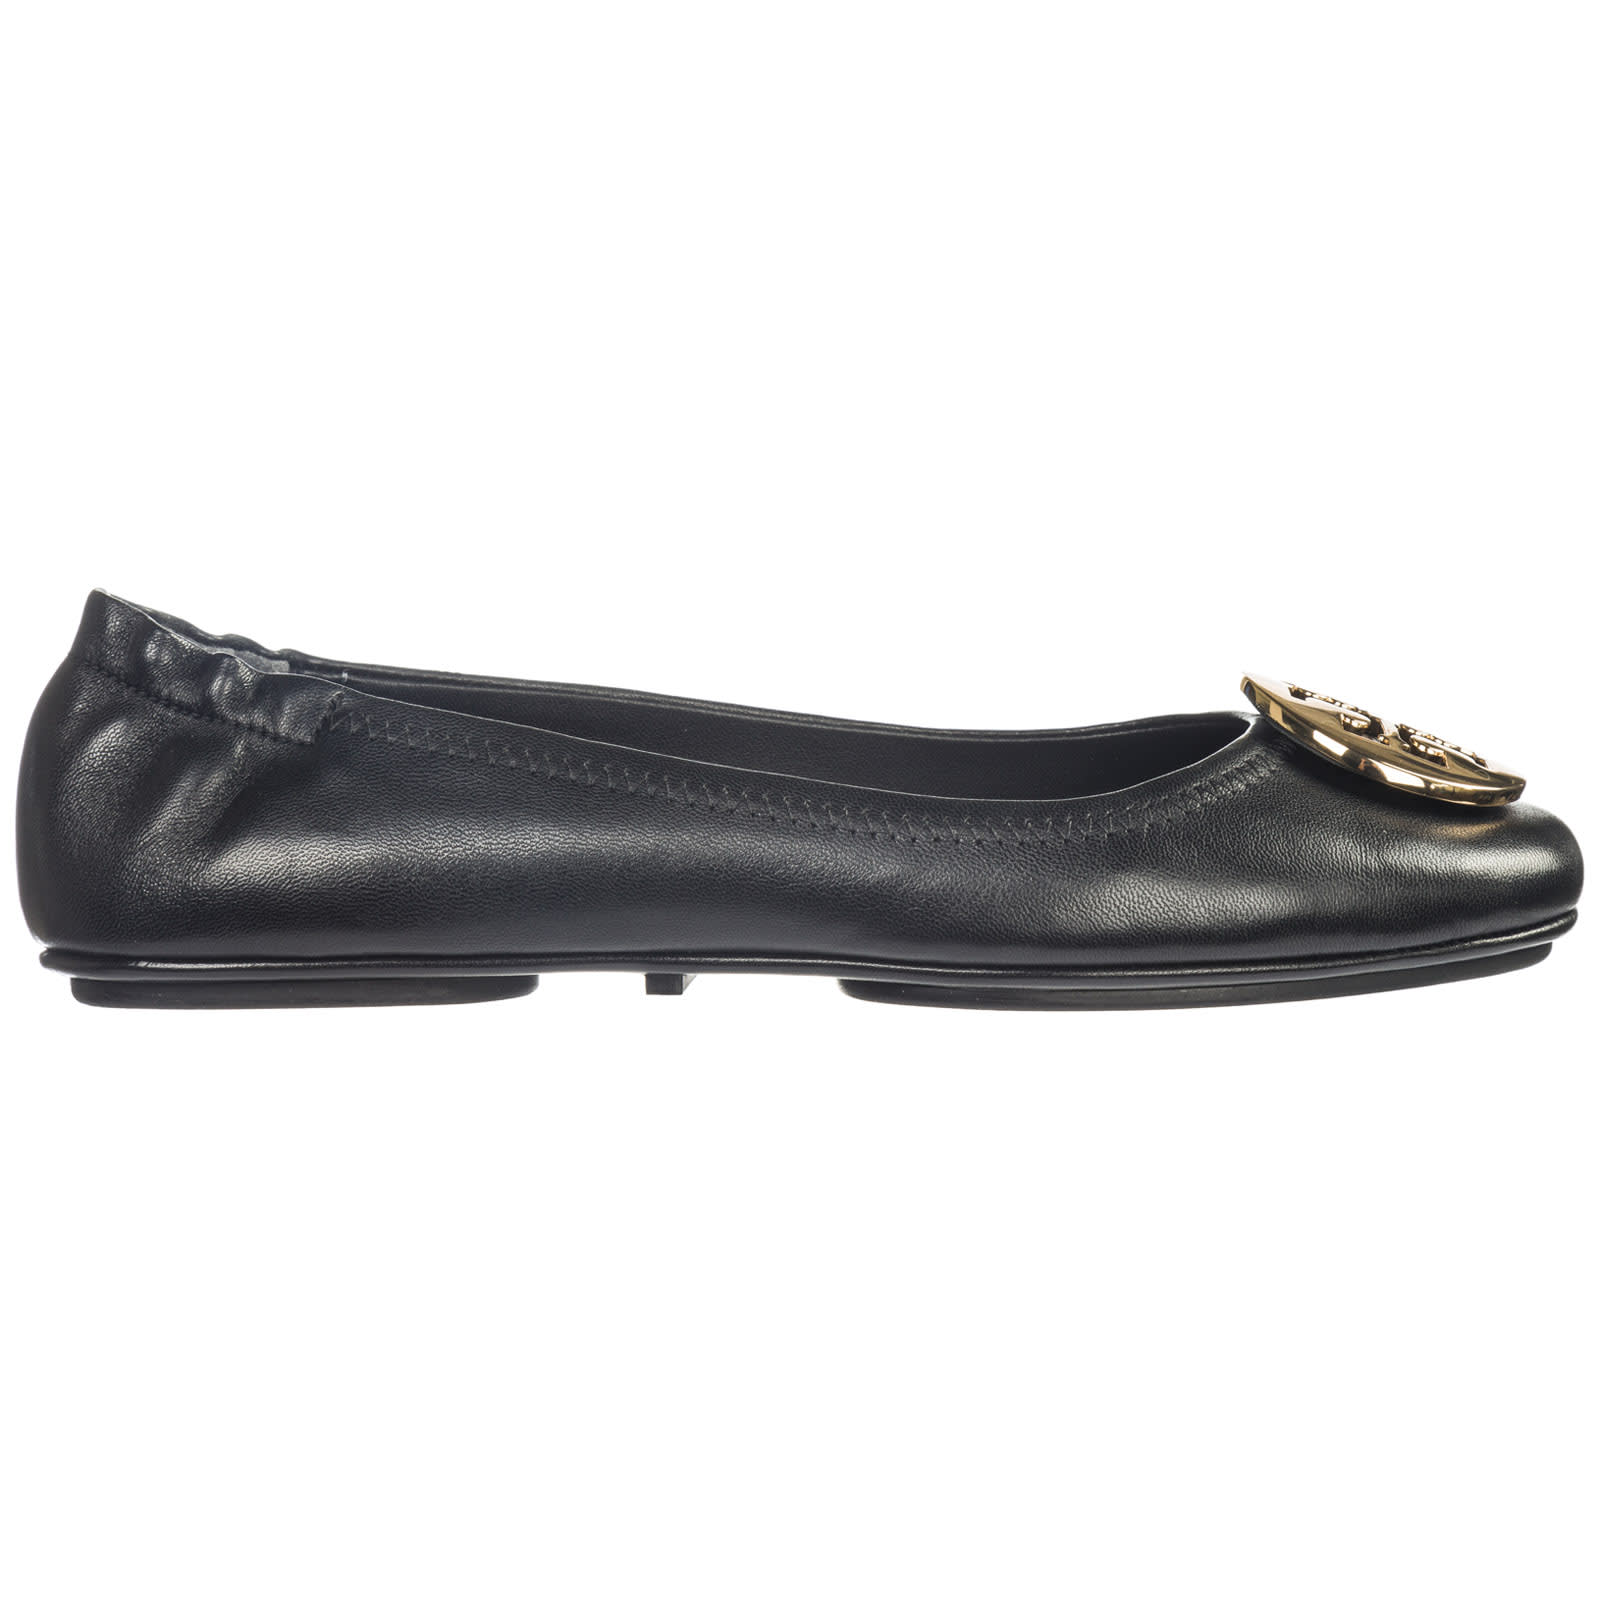 Tory Burch Wallabee Ballet Pumps In Perfect Black